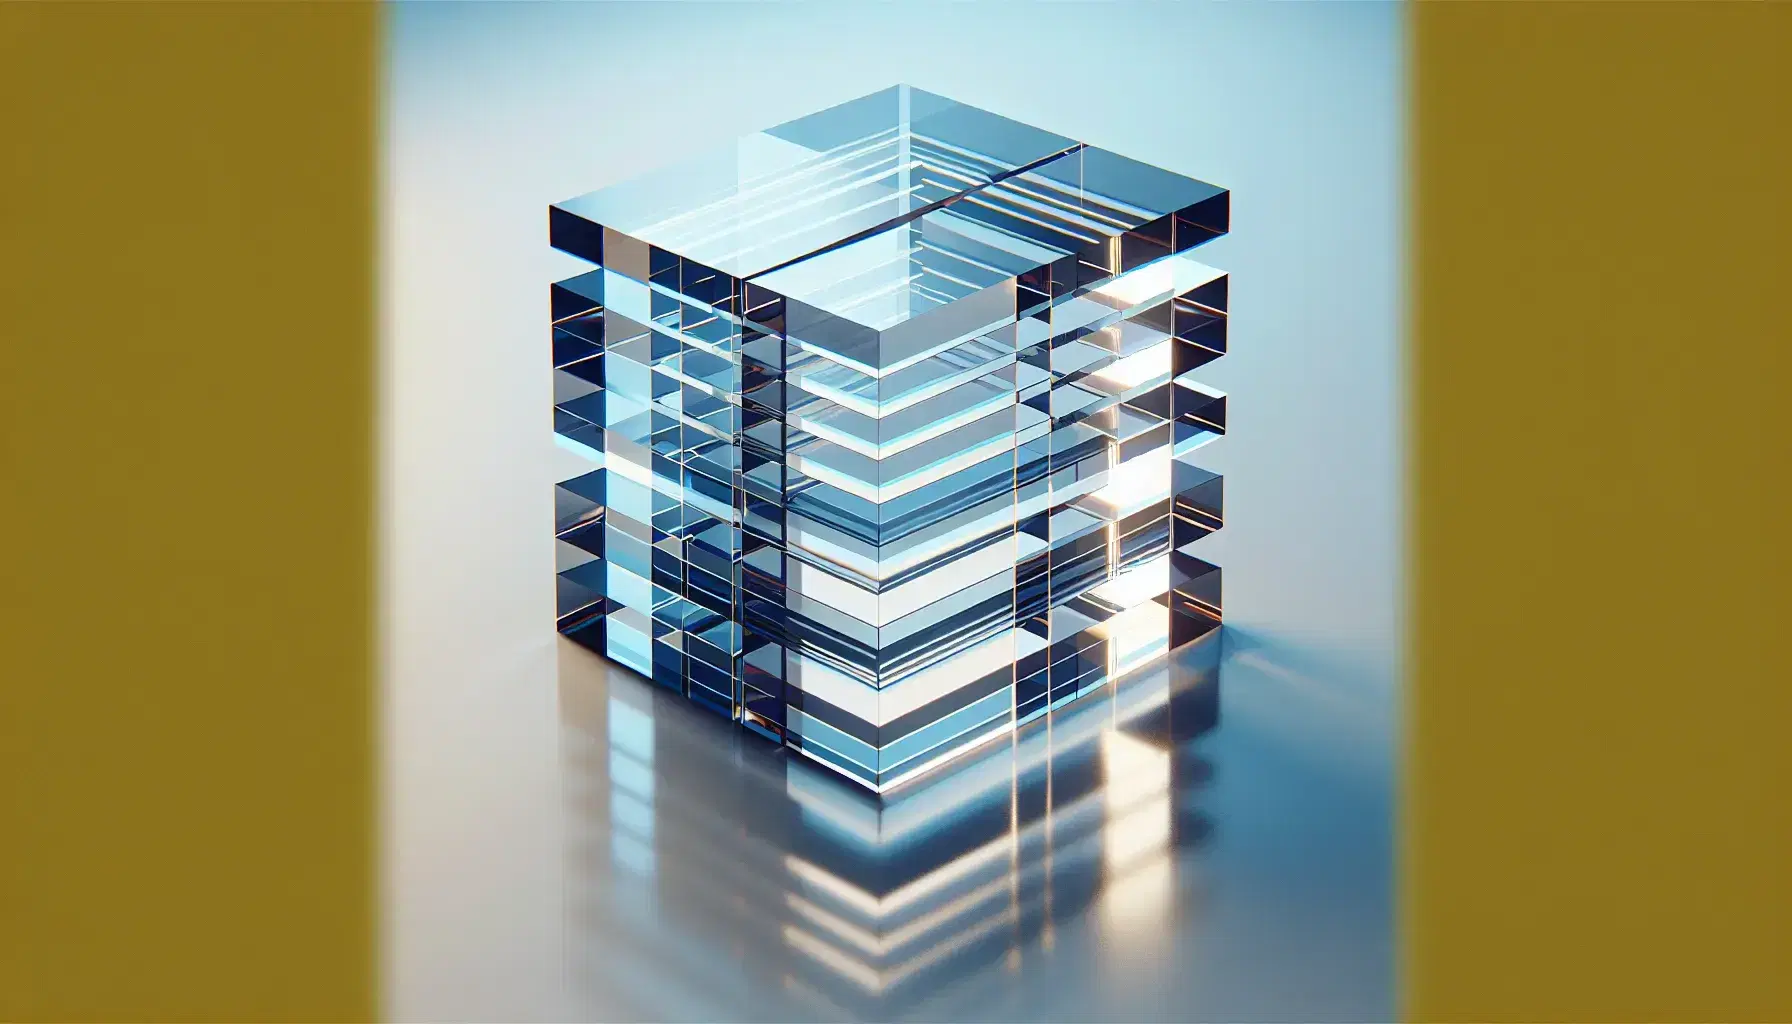 Three-dimensional glass cylinder model with horizontal slices creating a disassembled effect, on a reflective surface with a soft blue to white gradient background.